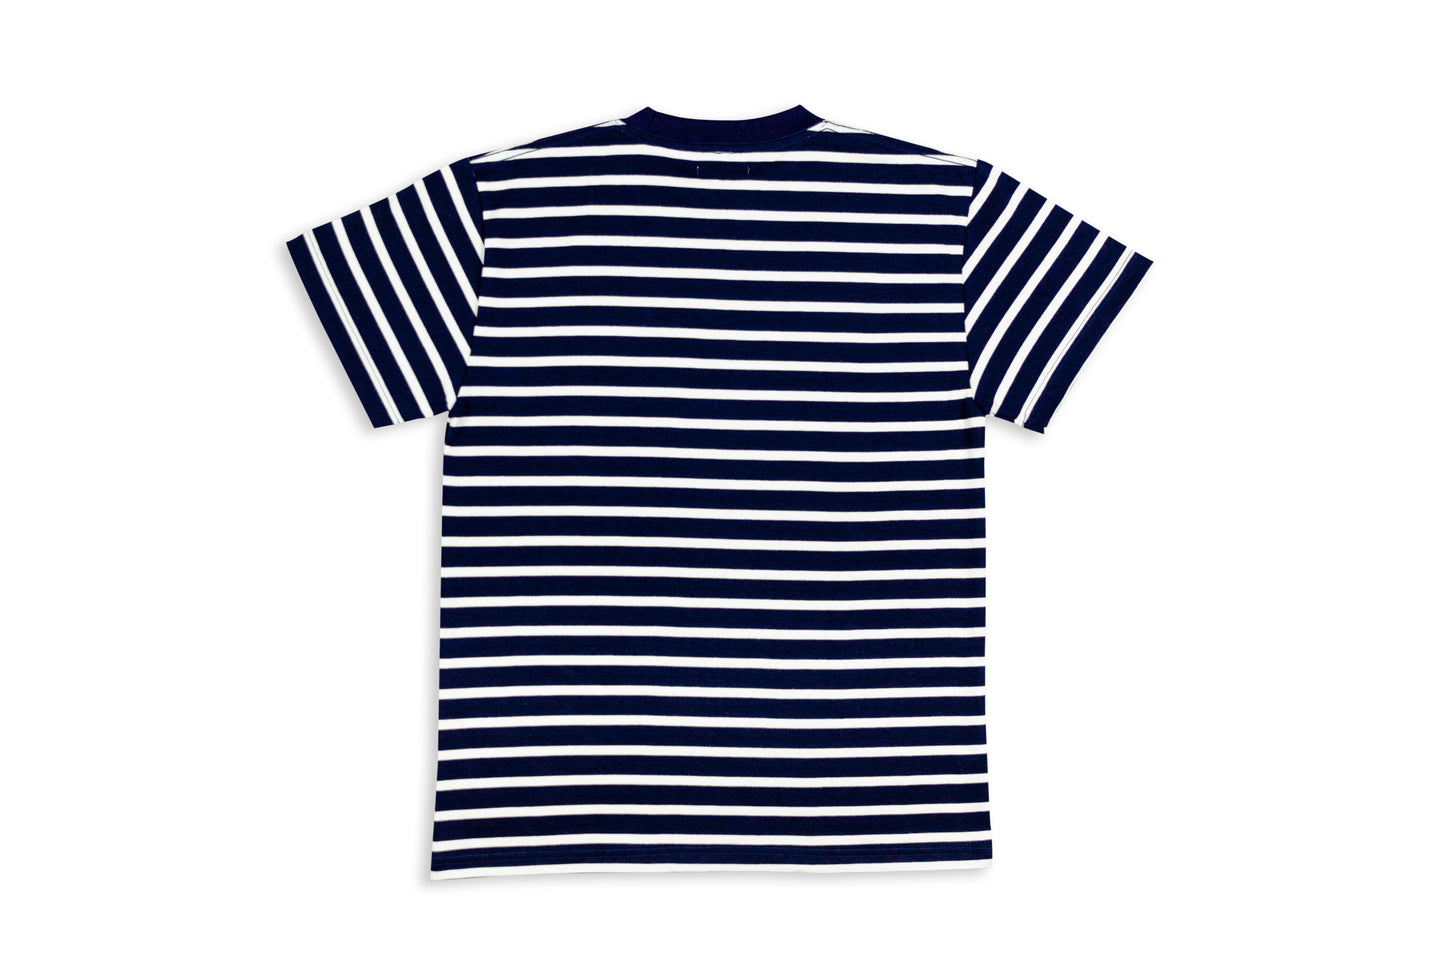 GW Embroidered Striped Tee (Navy Blue)